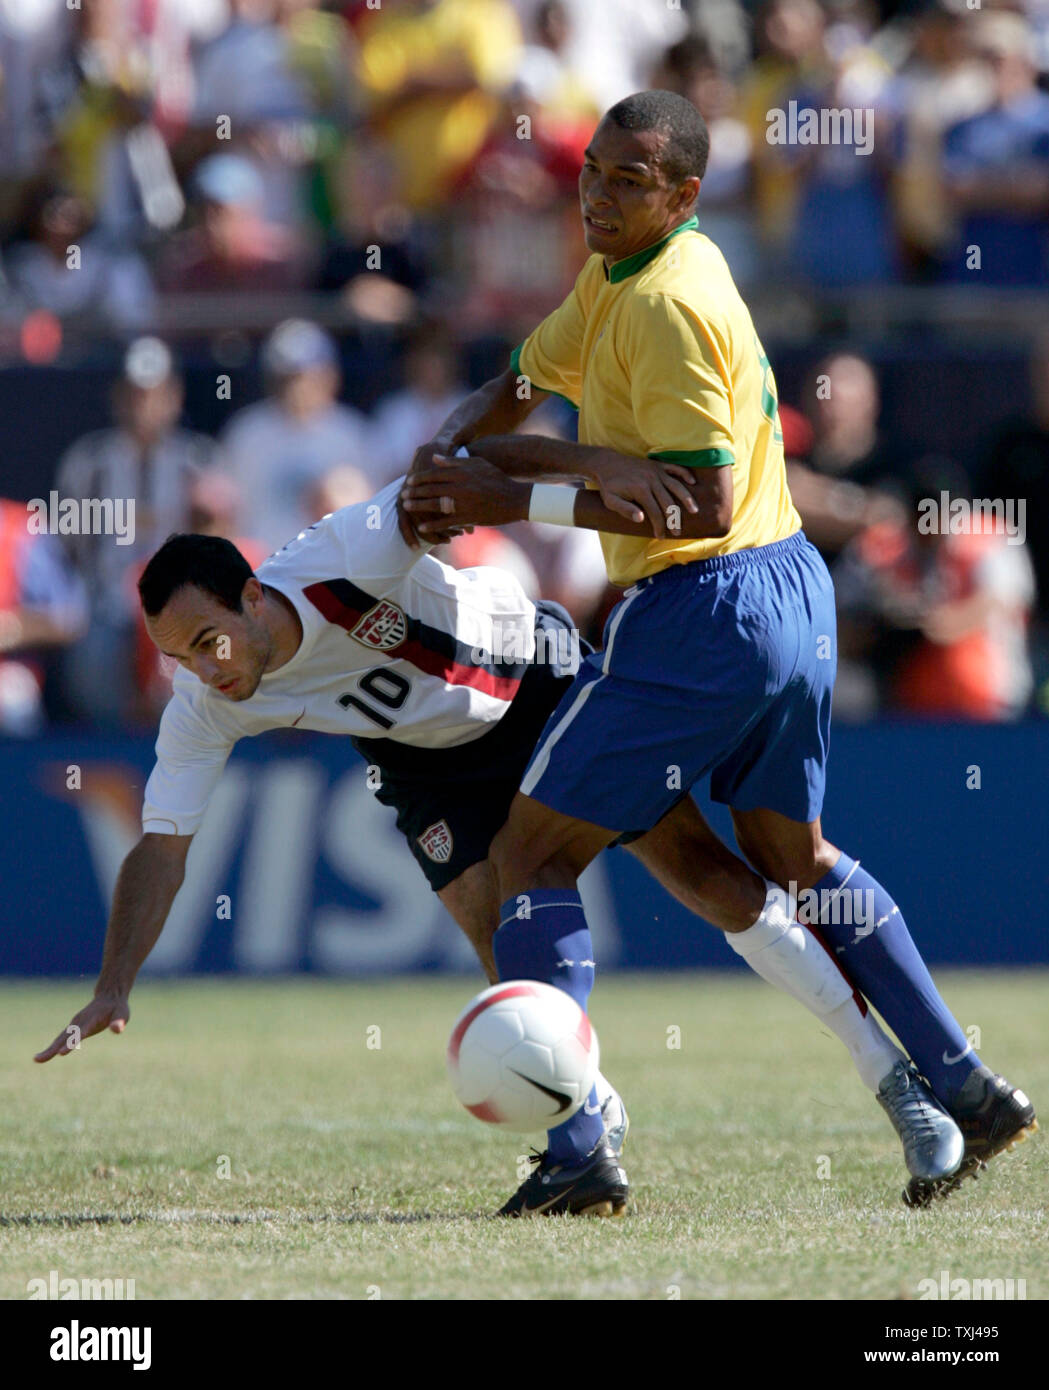 USA midfielder Landon Donovan (10) is tripped up by Brazil midfielder Gilberto Silva (8). Brazil defeated the USA 4-2 in their international friendly soccer match at Soldier Field in Chicago, September 9, 2007. (UPI Photo/Mark Cowan) Stock Photo